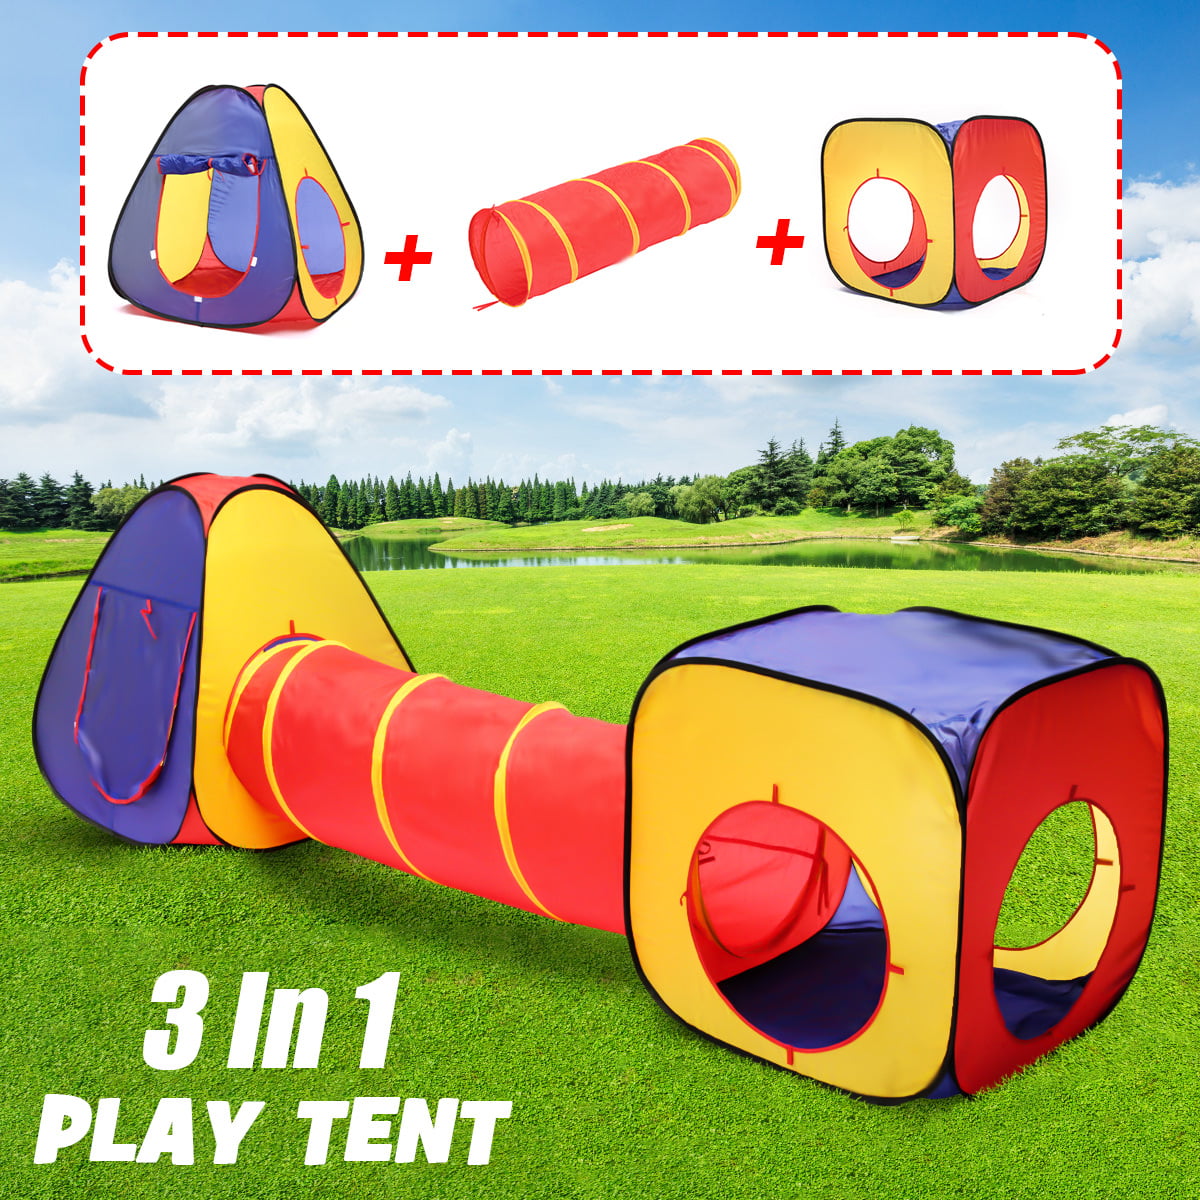 Pop Up Play Tent Tunnel 3 in 1 Ball Pit Tent for Children Indoor/Outdoor/Garden Playhouse Girls Boys Peradix Baby Kids Play Tunnel Tent